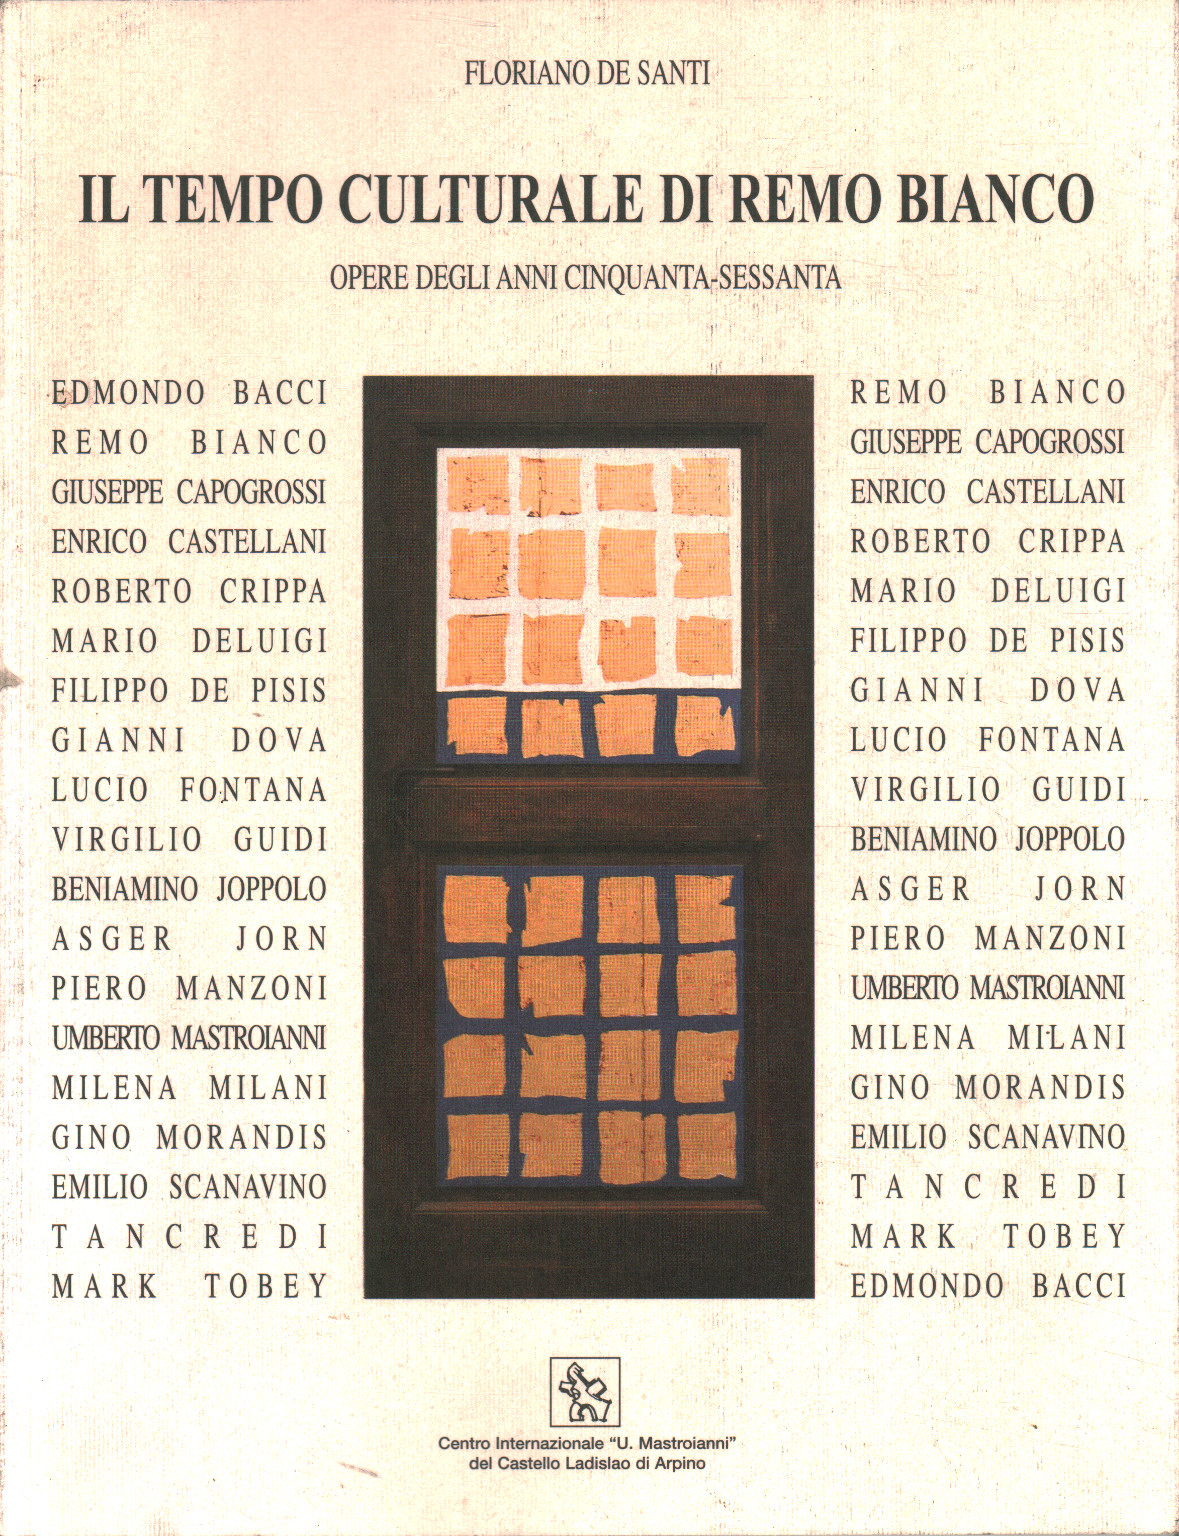 The cultural time of Remo Bianco. Works of the ann, Floriano De Santi